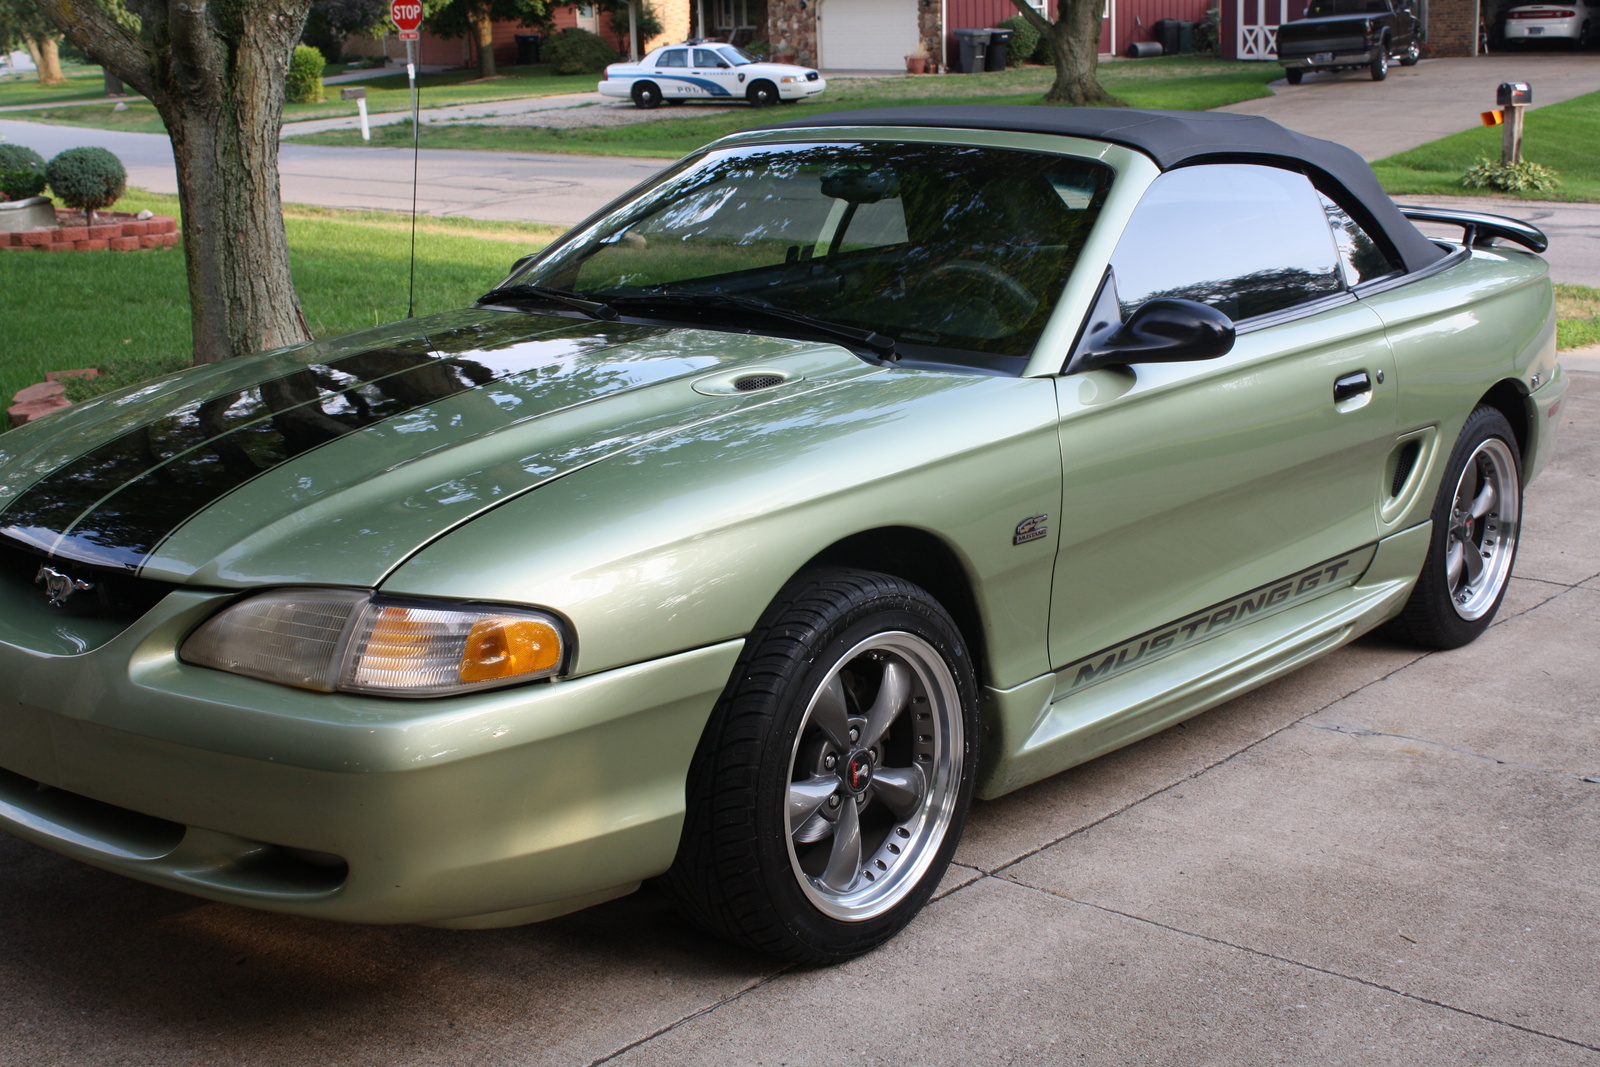 1995 mustang gt convertible fan blows but only defroster works